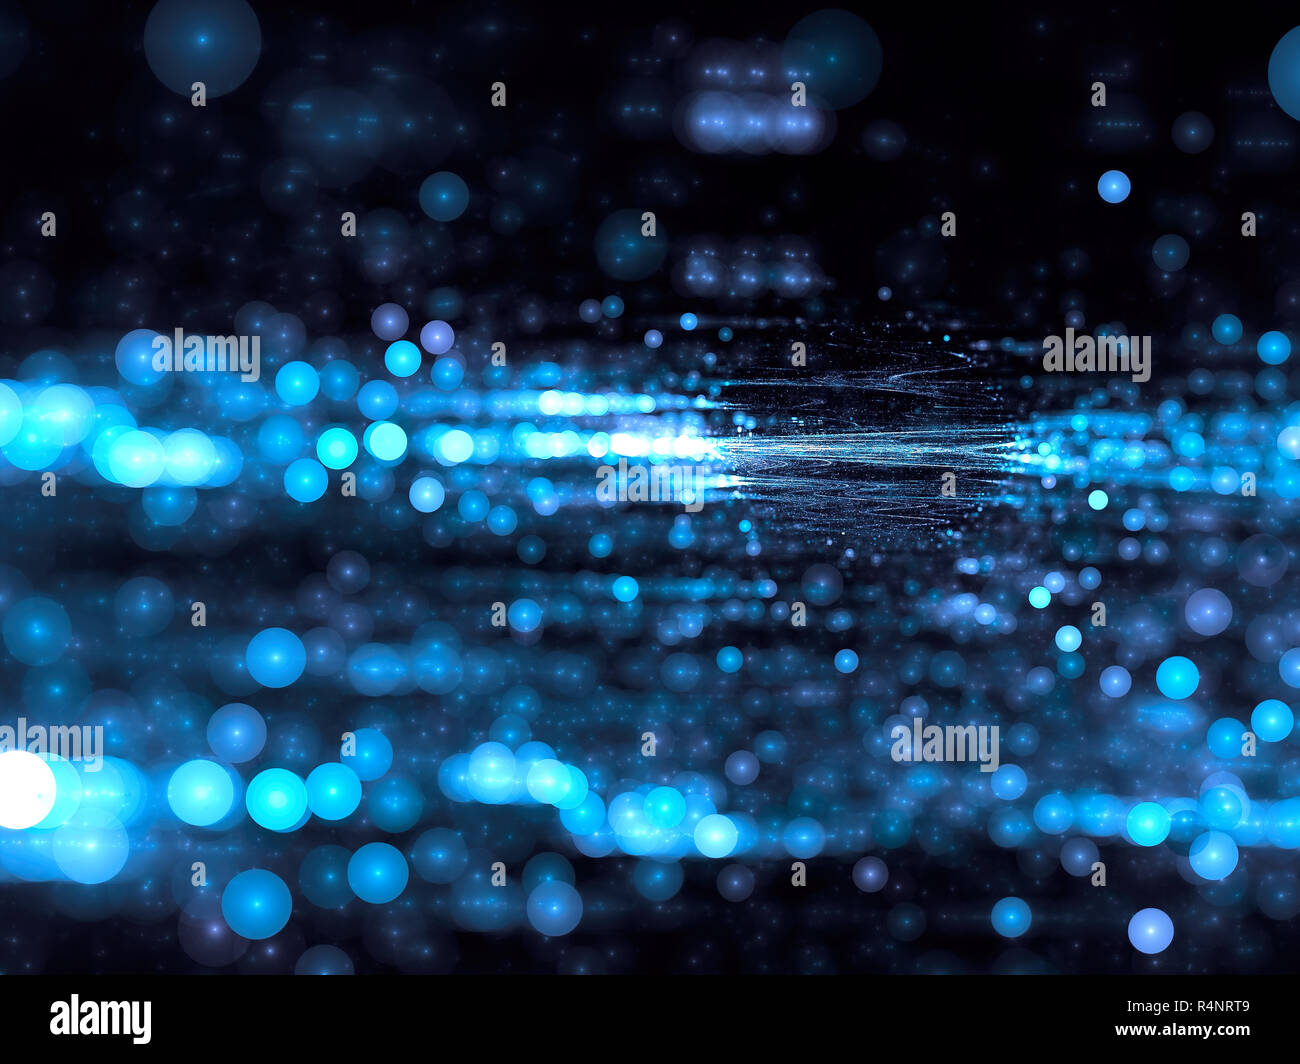 Blue fractal backdrop - blurred surface with bubbles bokeh and light effects like water surface. Abstract computer-generated image - graphic design el Stock Photo